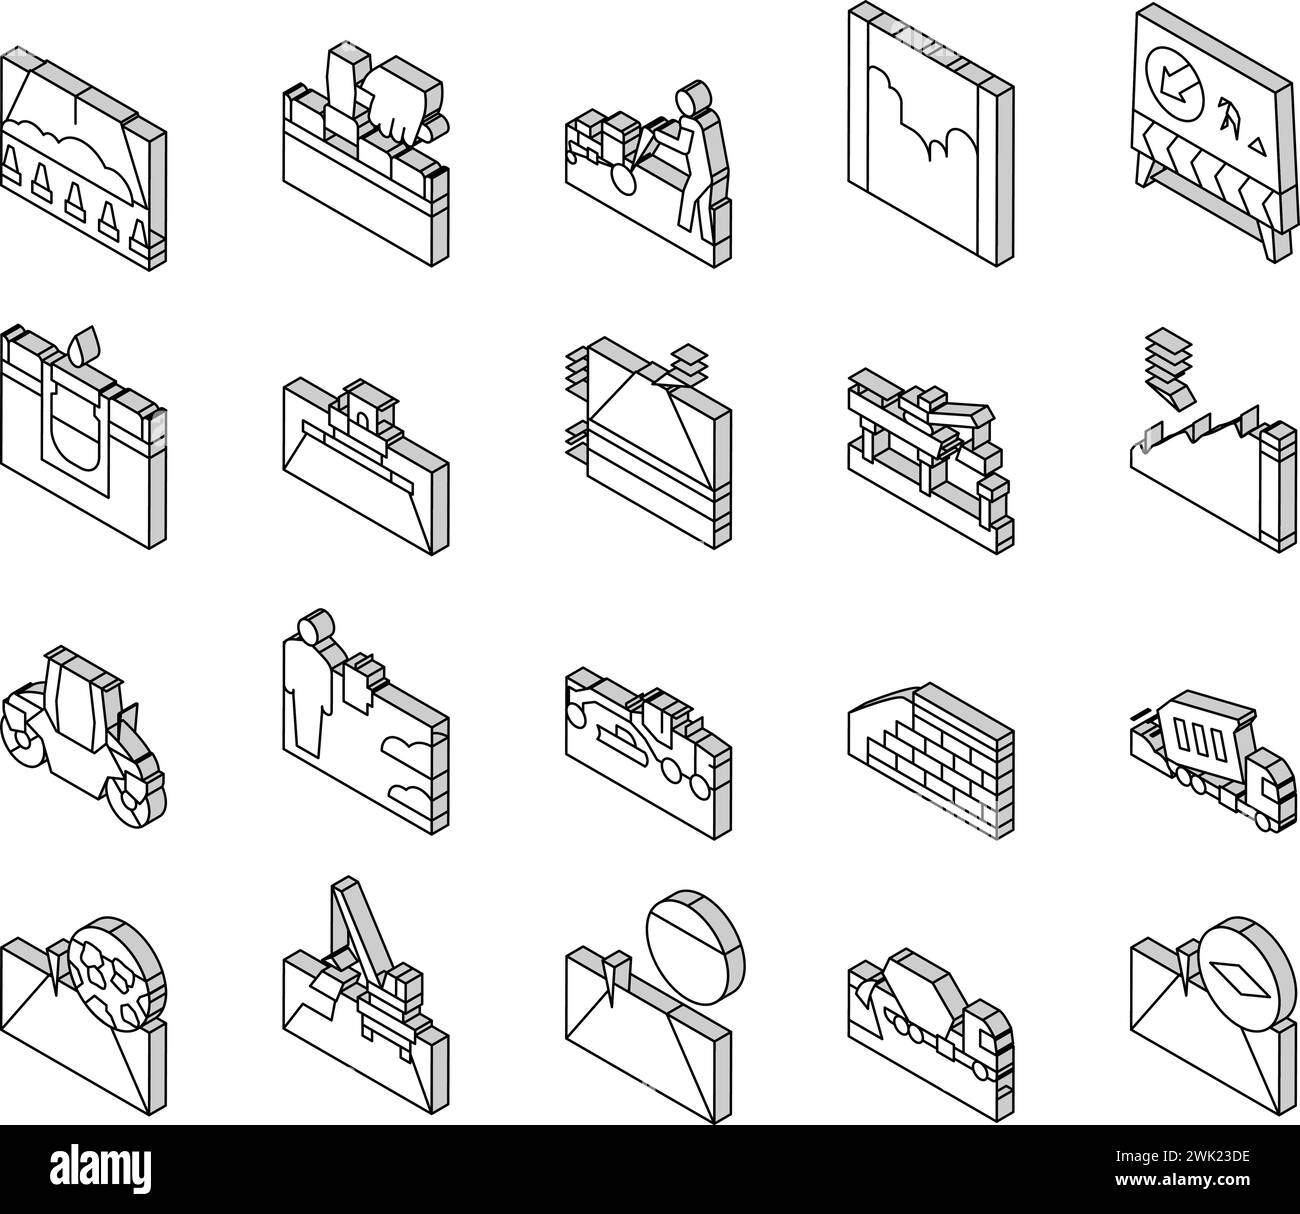 Road Construction Collection isometric icons set vector Stock Vector